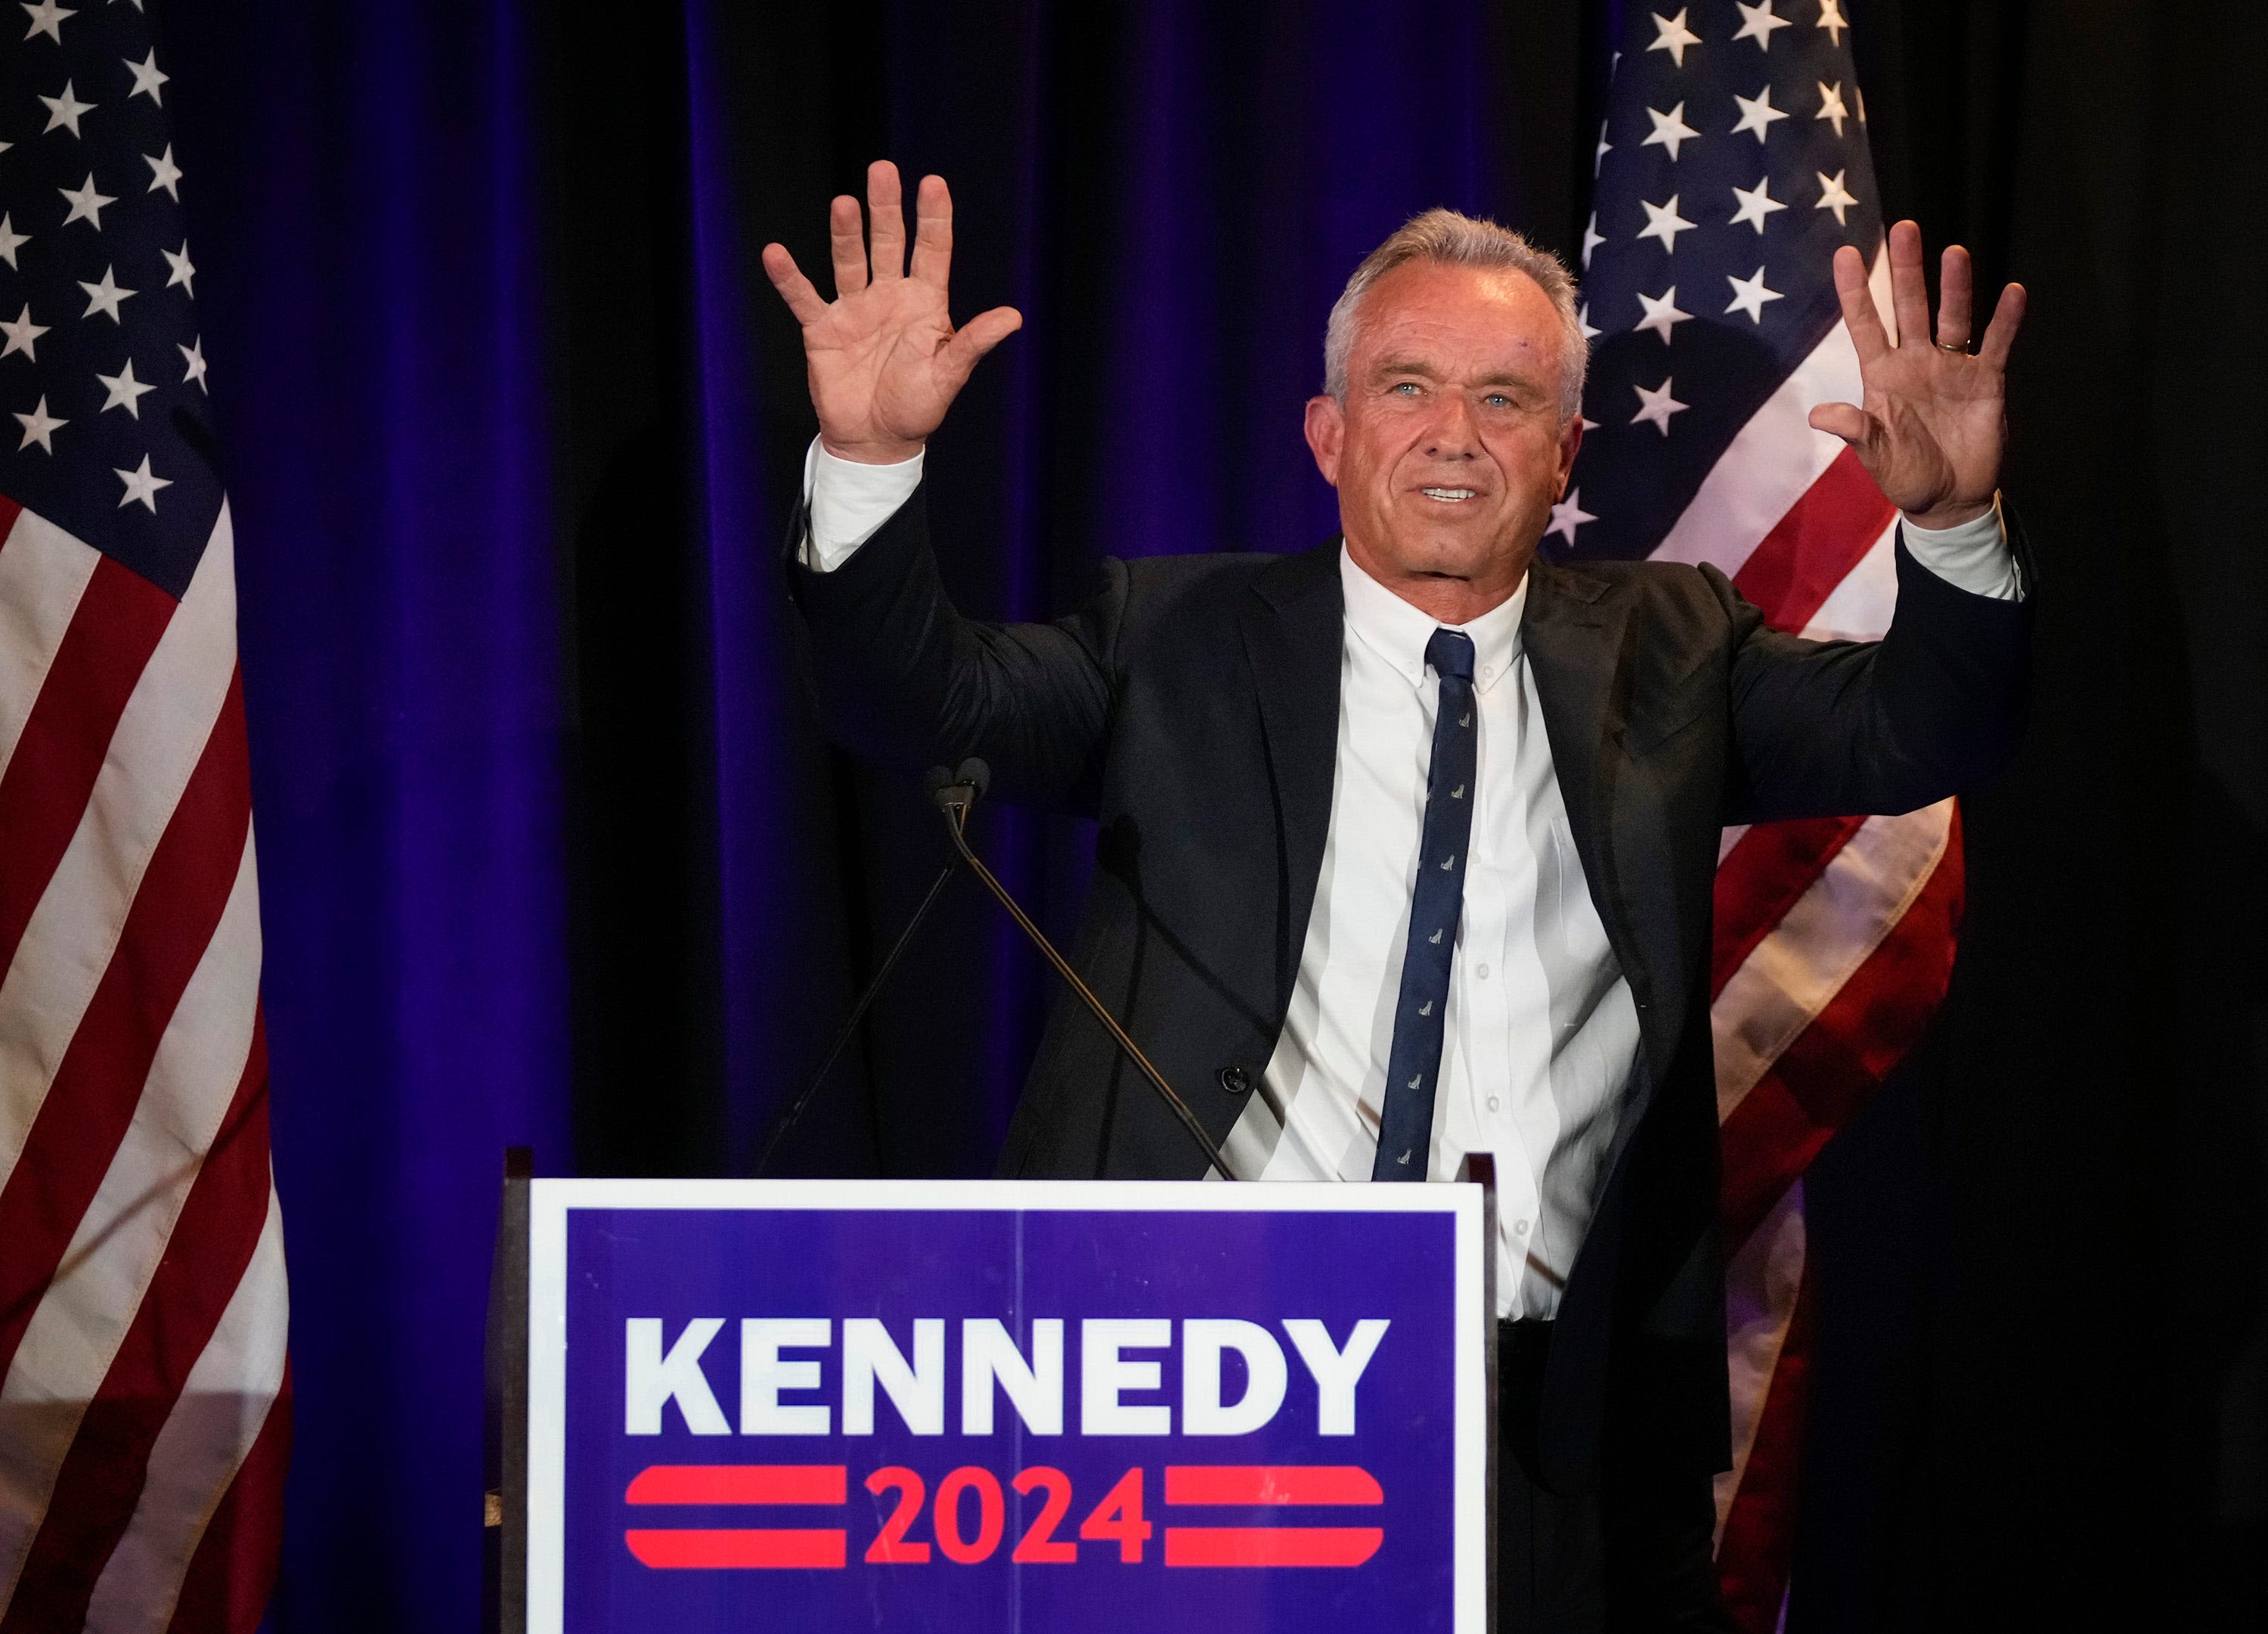 Texas Democrats say RFK Jr. should be denied place on Nov. 5 statewide ballot